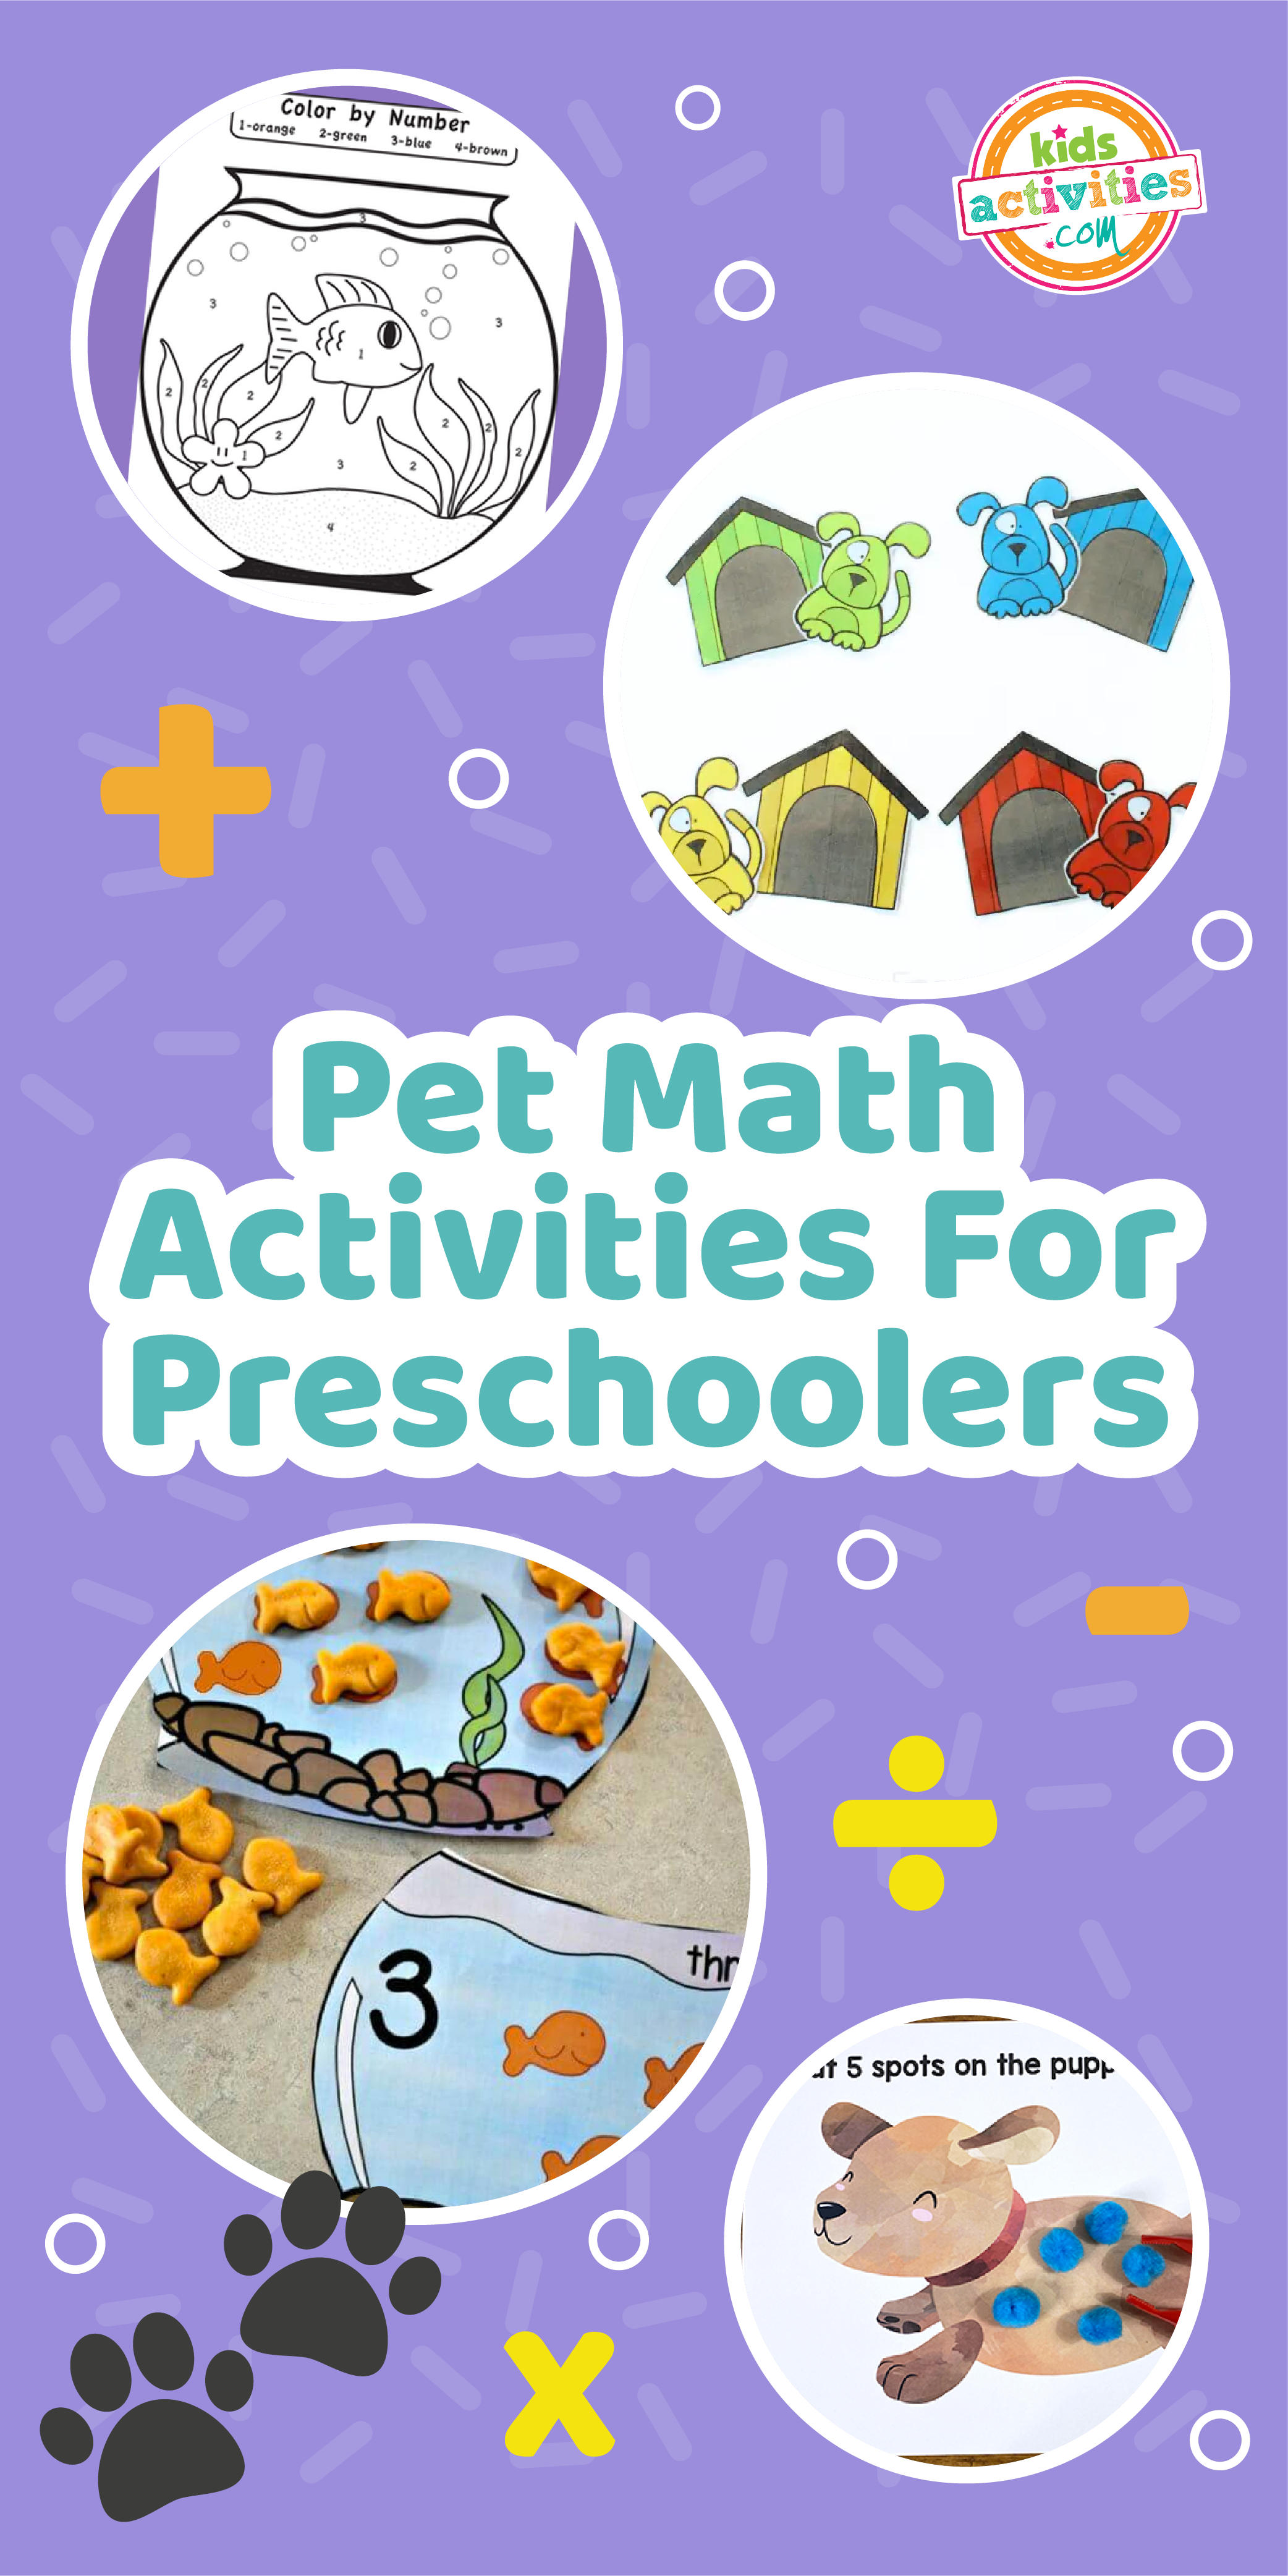 Image shows a compilation of pet math activities for preschoolers from different sources.